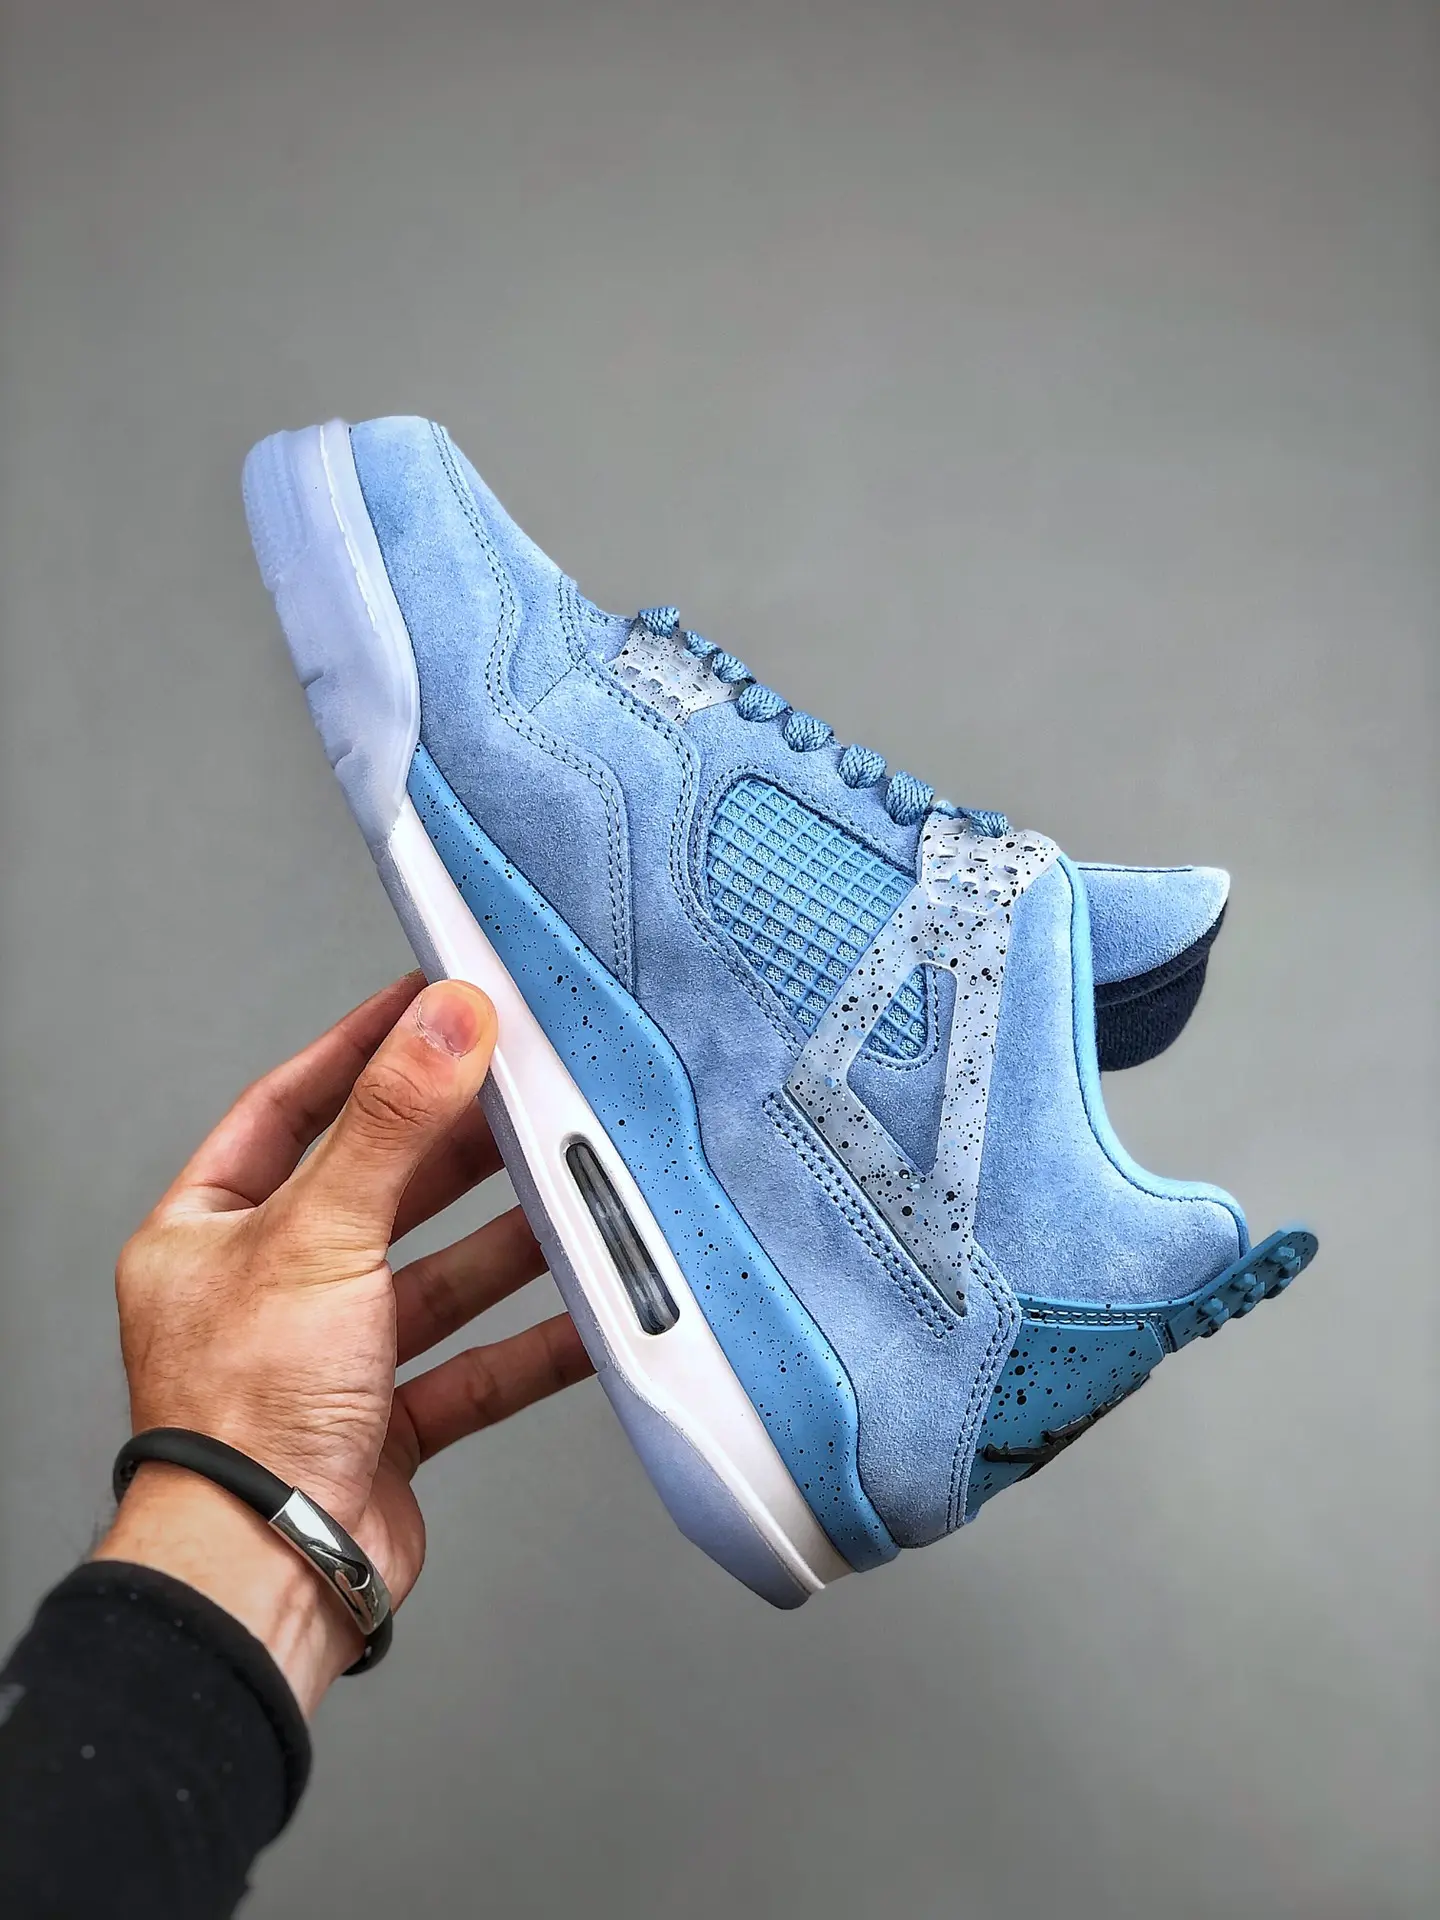 How To Lace Jordan 4? The Ultimate Guide to Lacing and Styling Jordan 4 Sneakers | YtaYta